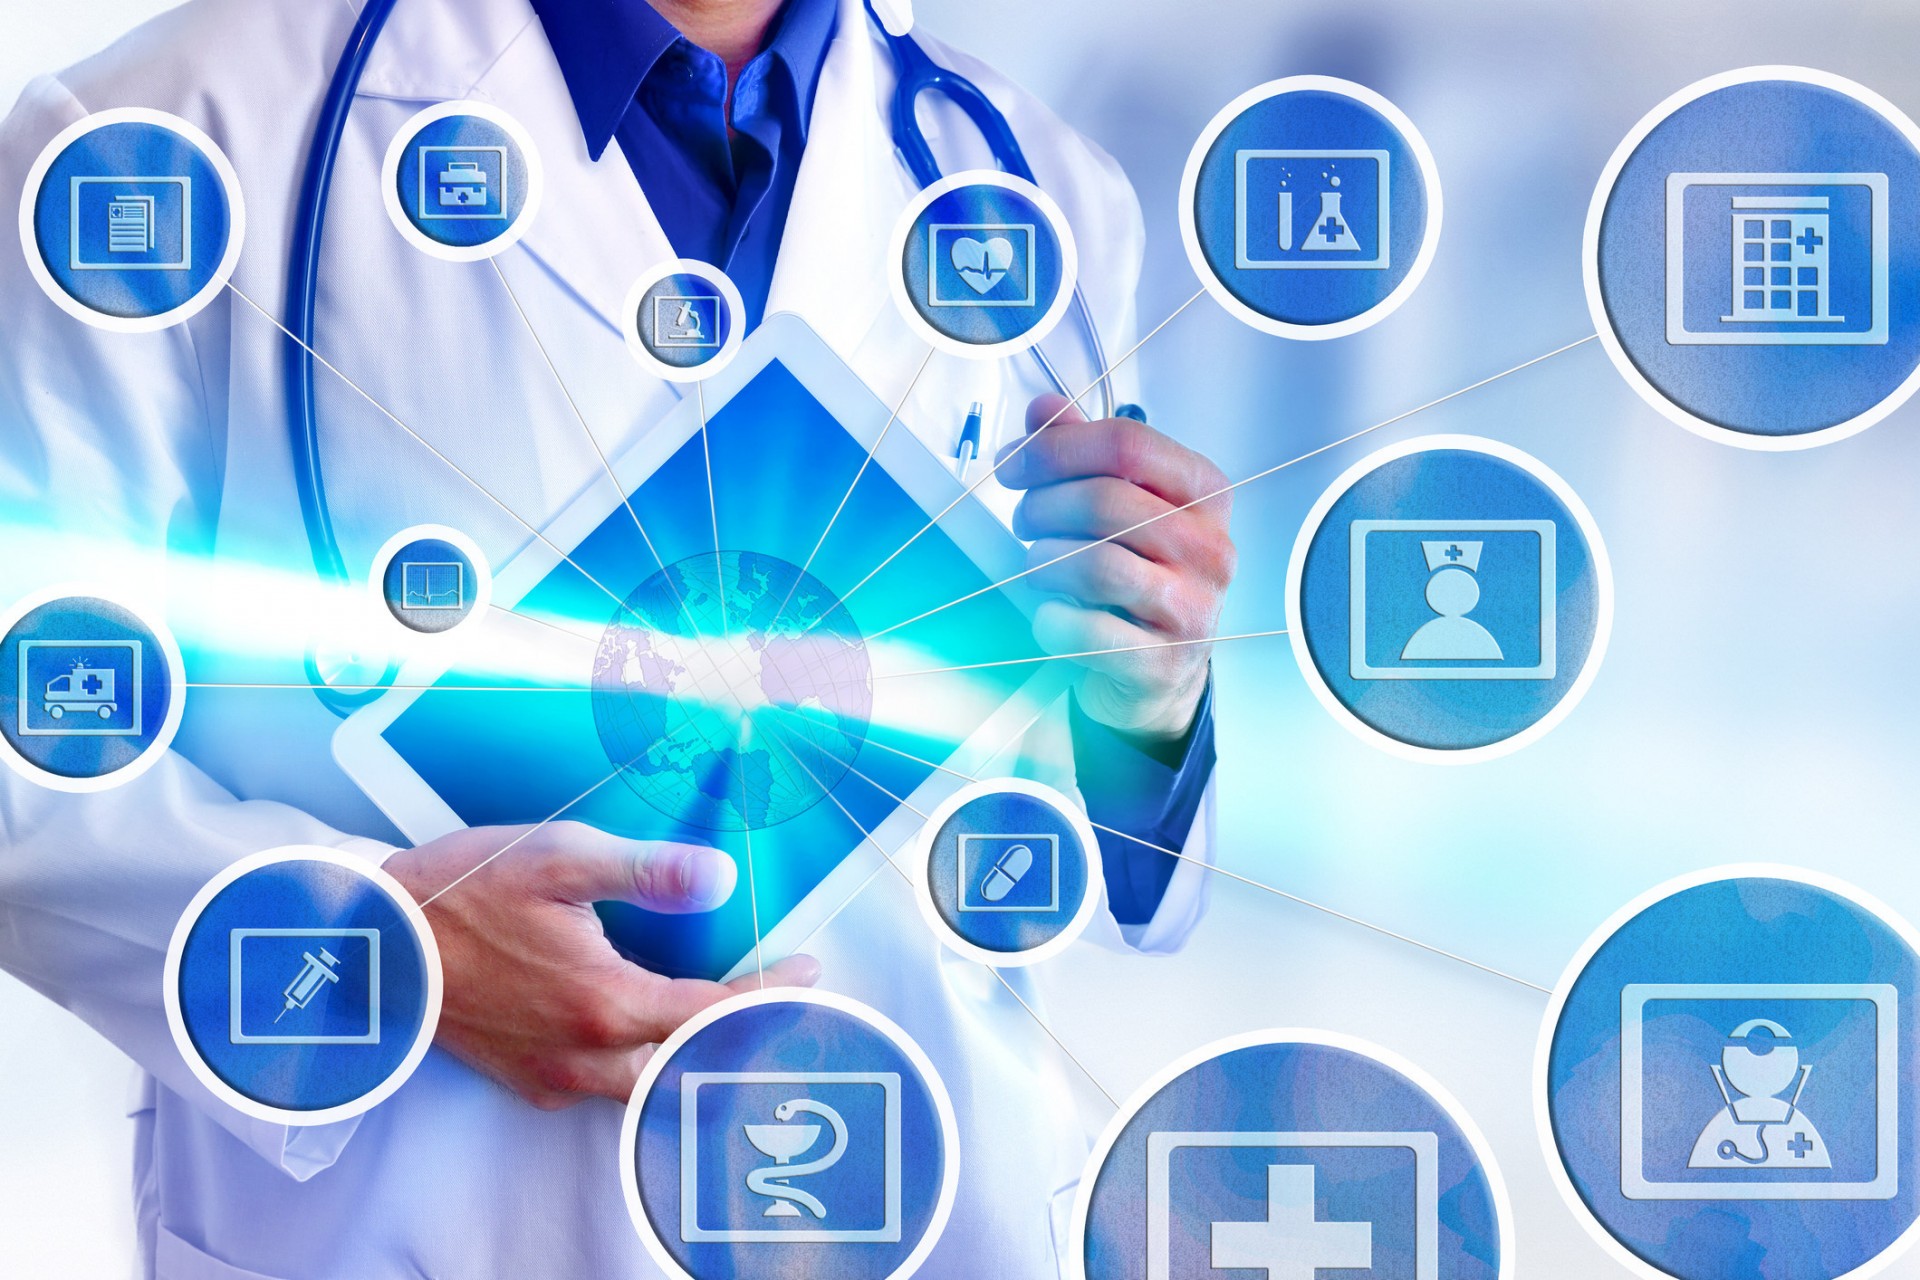 Healthcare Cloud Computing Market Size Industry Analysis, Size, Trends, Growth And Outlook 2025